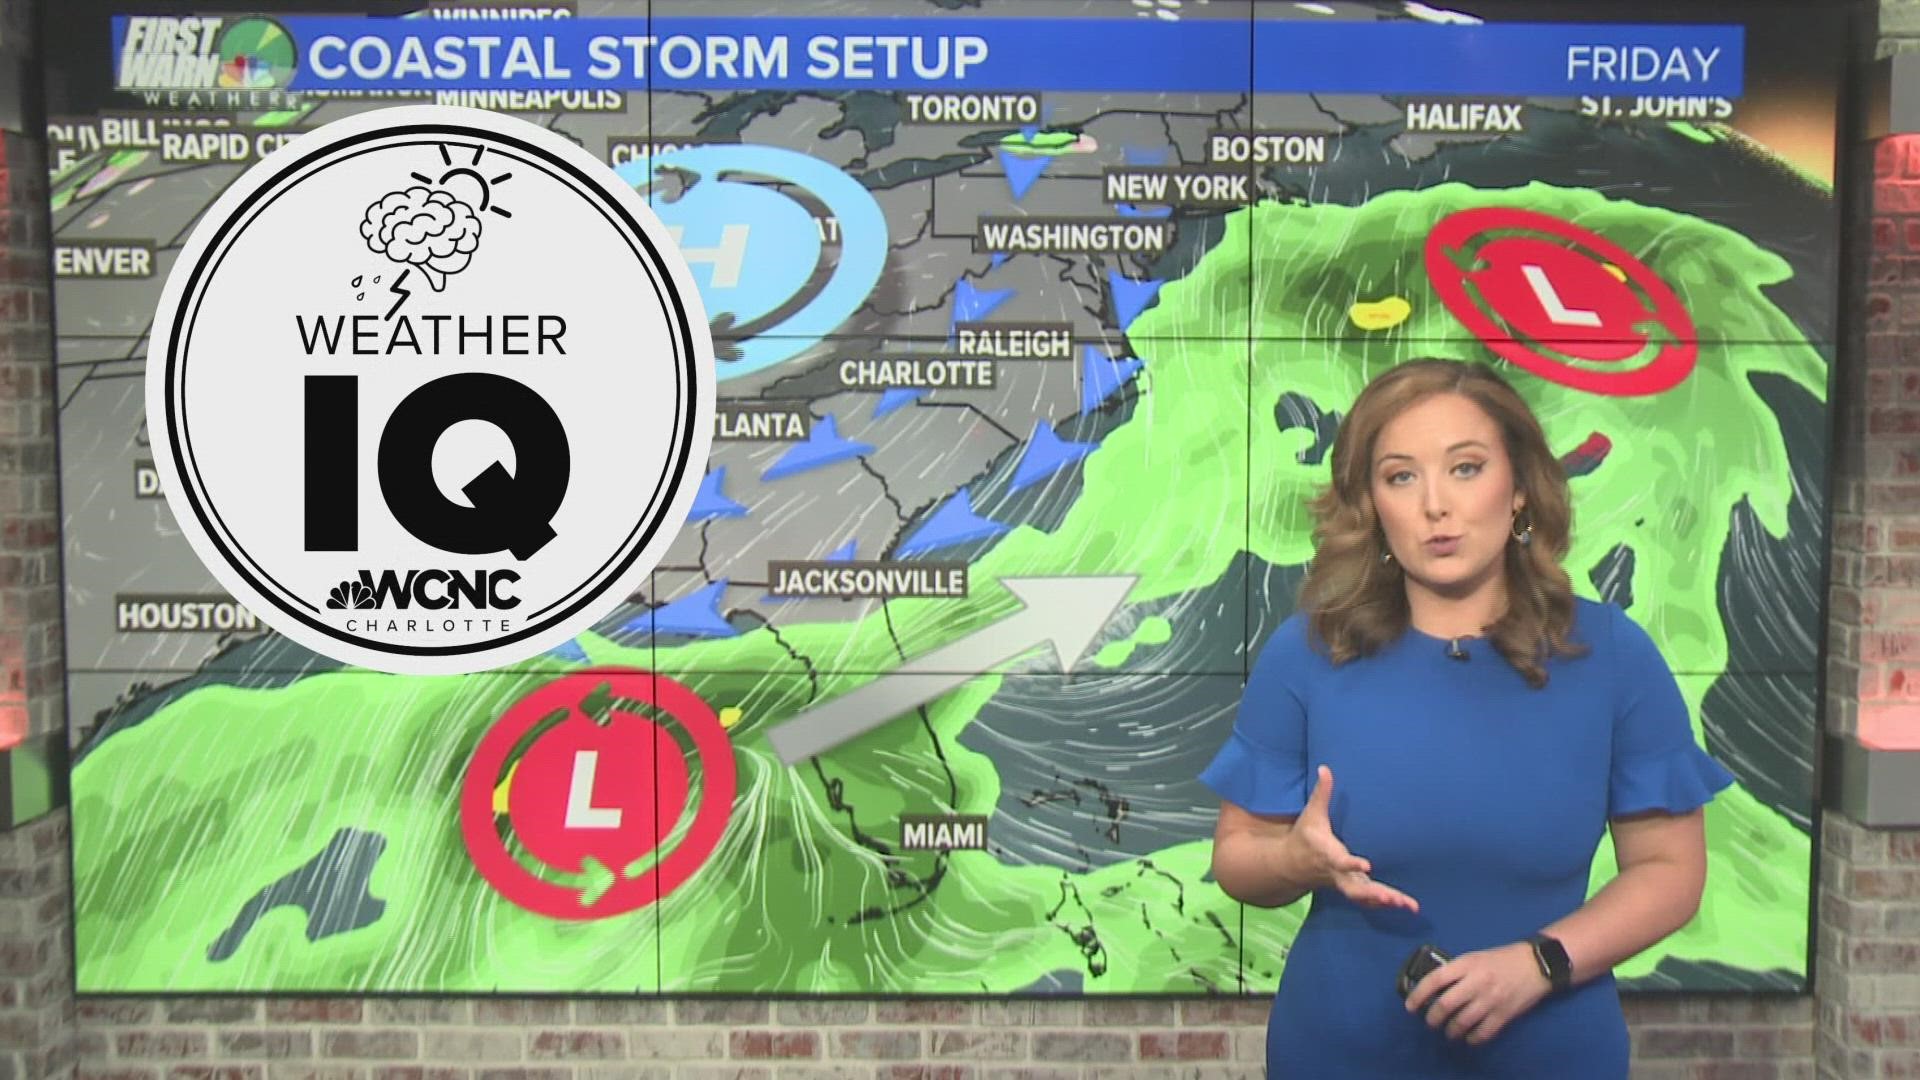 A coastal storm developing this weekend will setup heavy rain, gusty wind, and flooding for the Carolina coast. Meteorologist Brittany Van Voorhees explains.